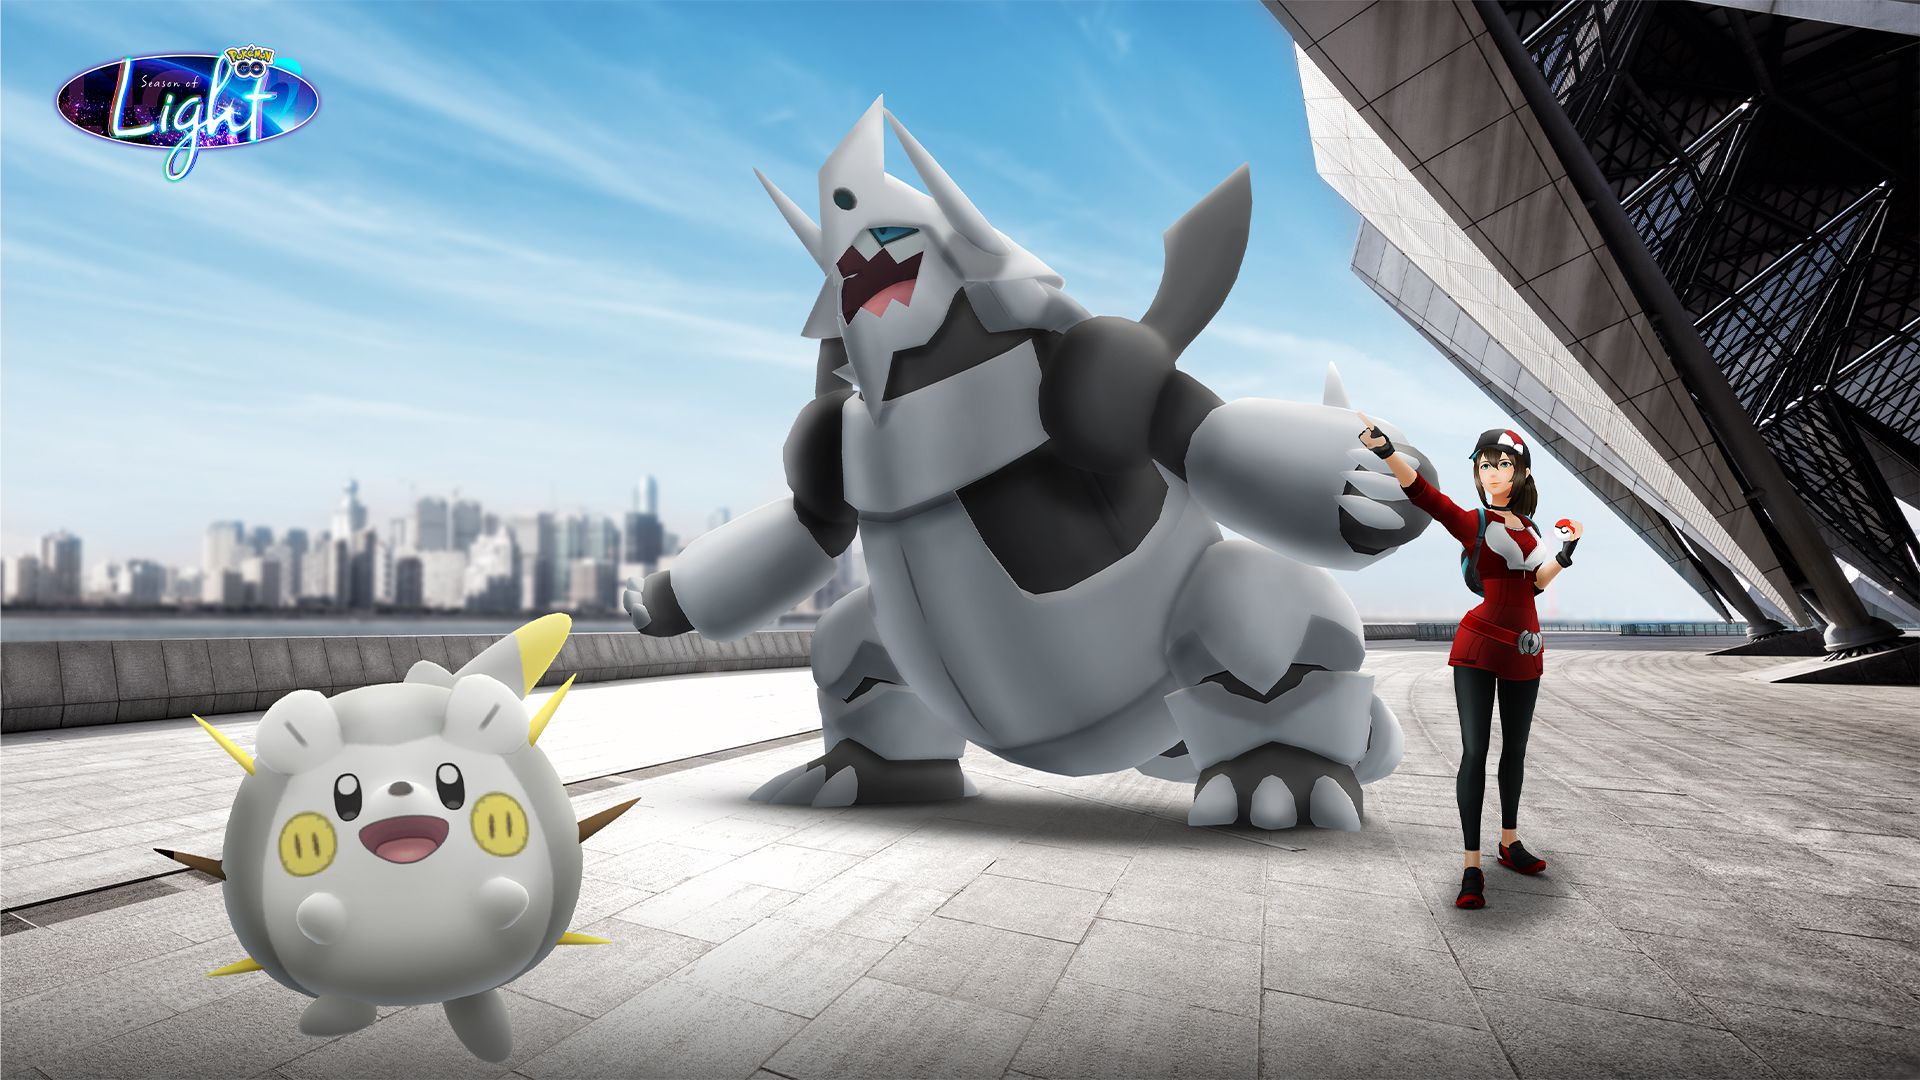 Togedemaru and Mega Aggron next to a Pokemon Go Trainer